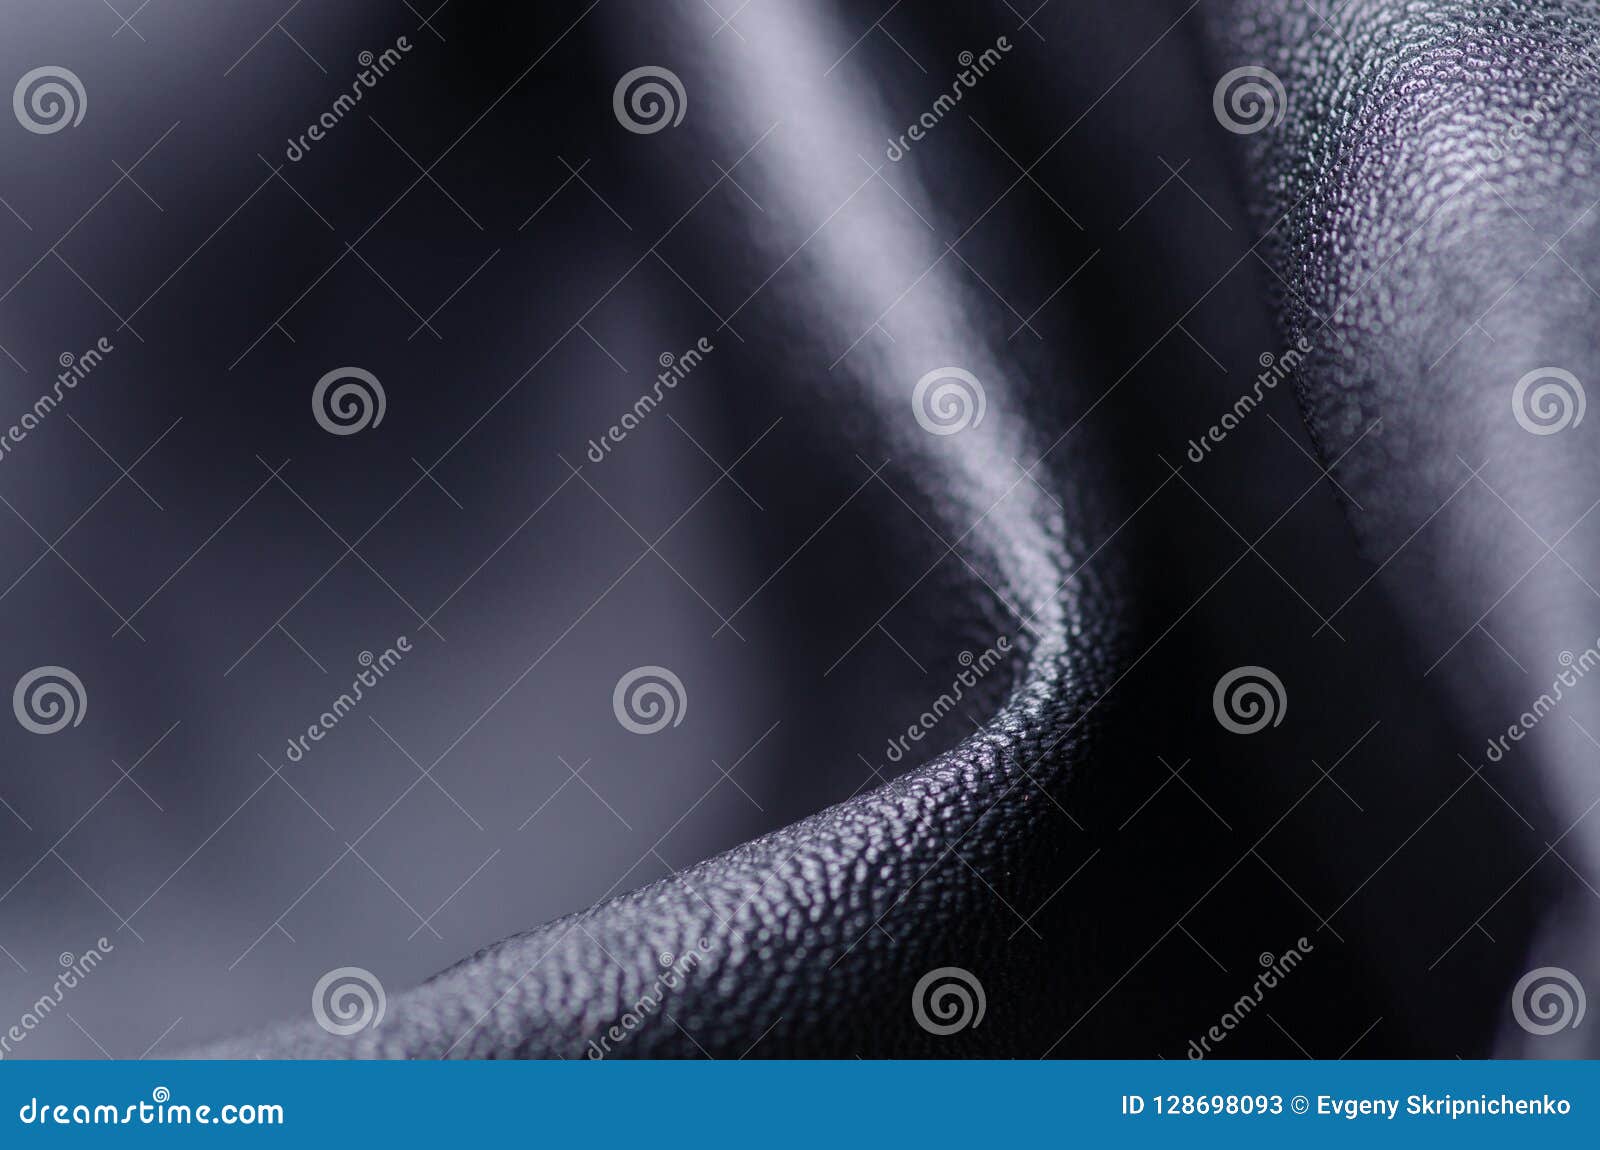 Black Leather Fabric Textile Material Texture Macro Stock Image - Image ...